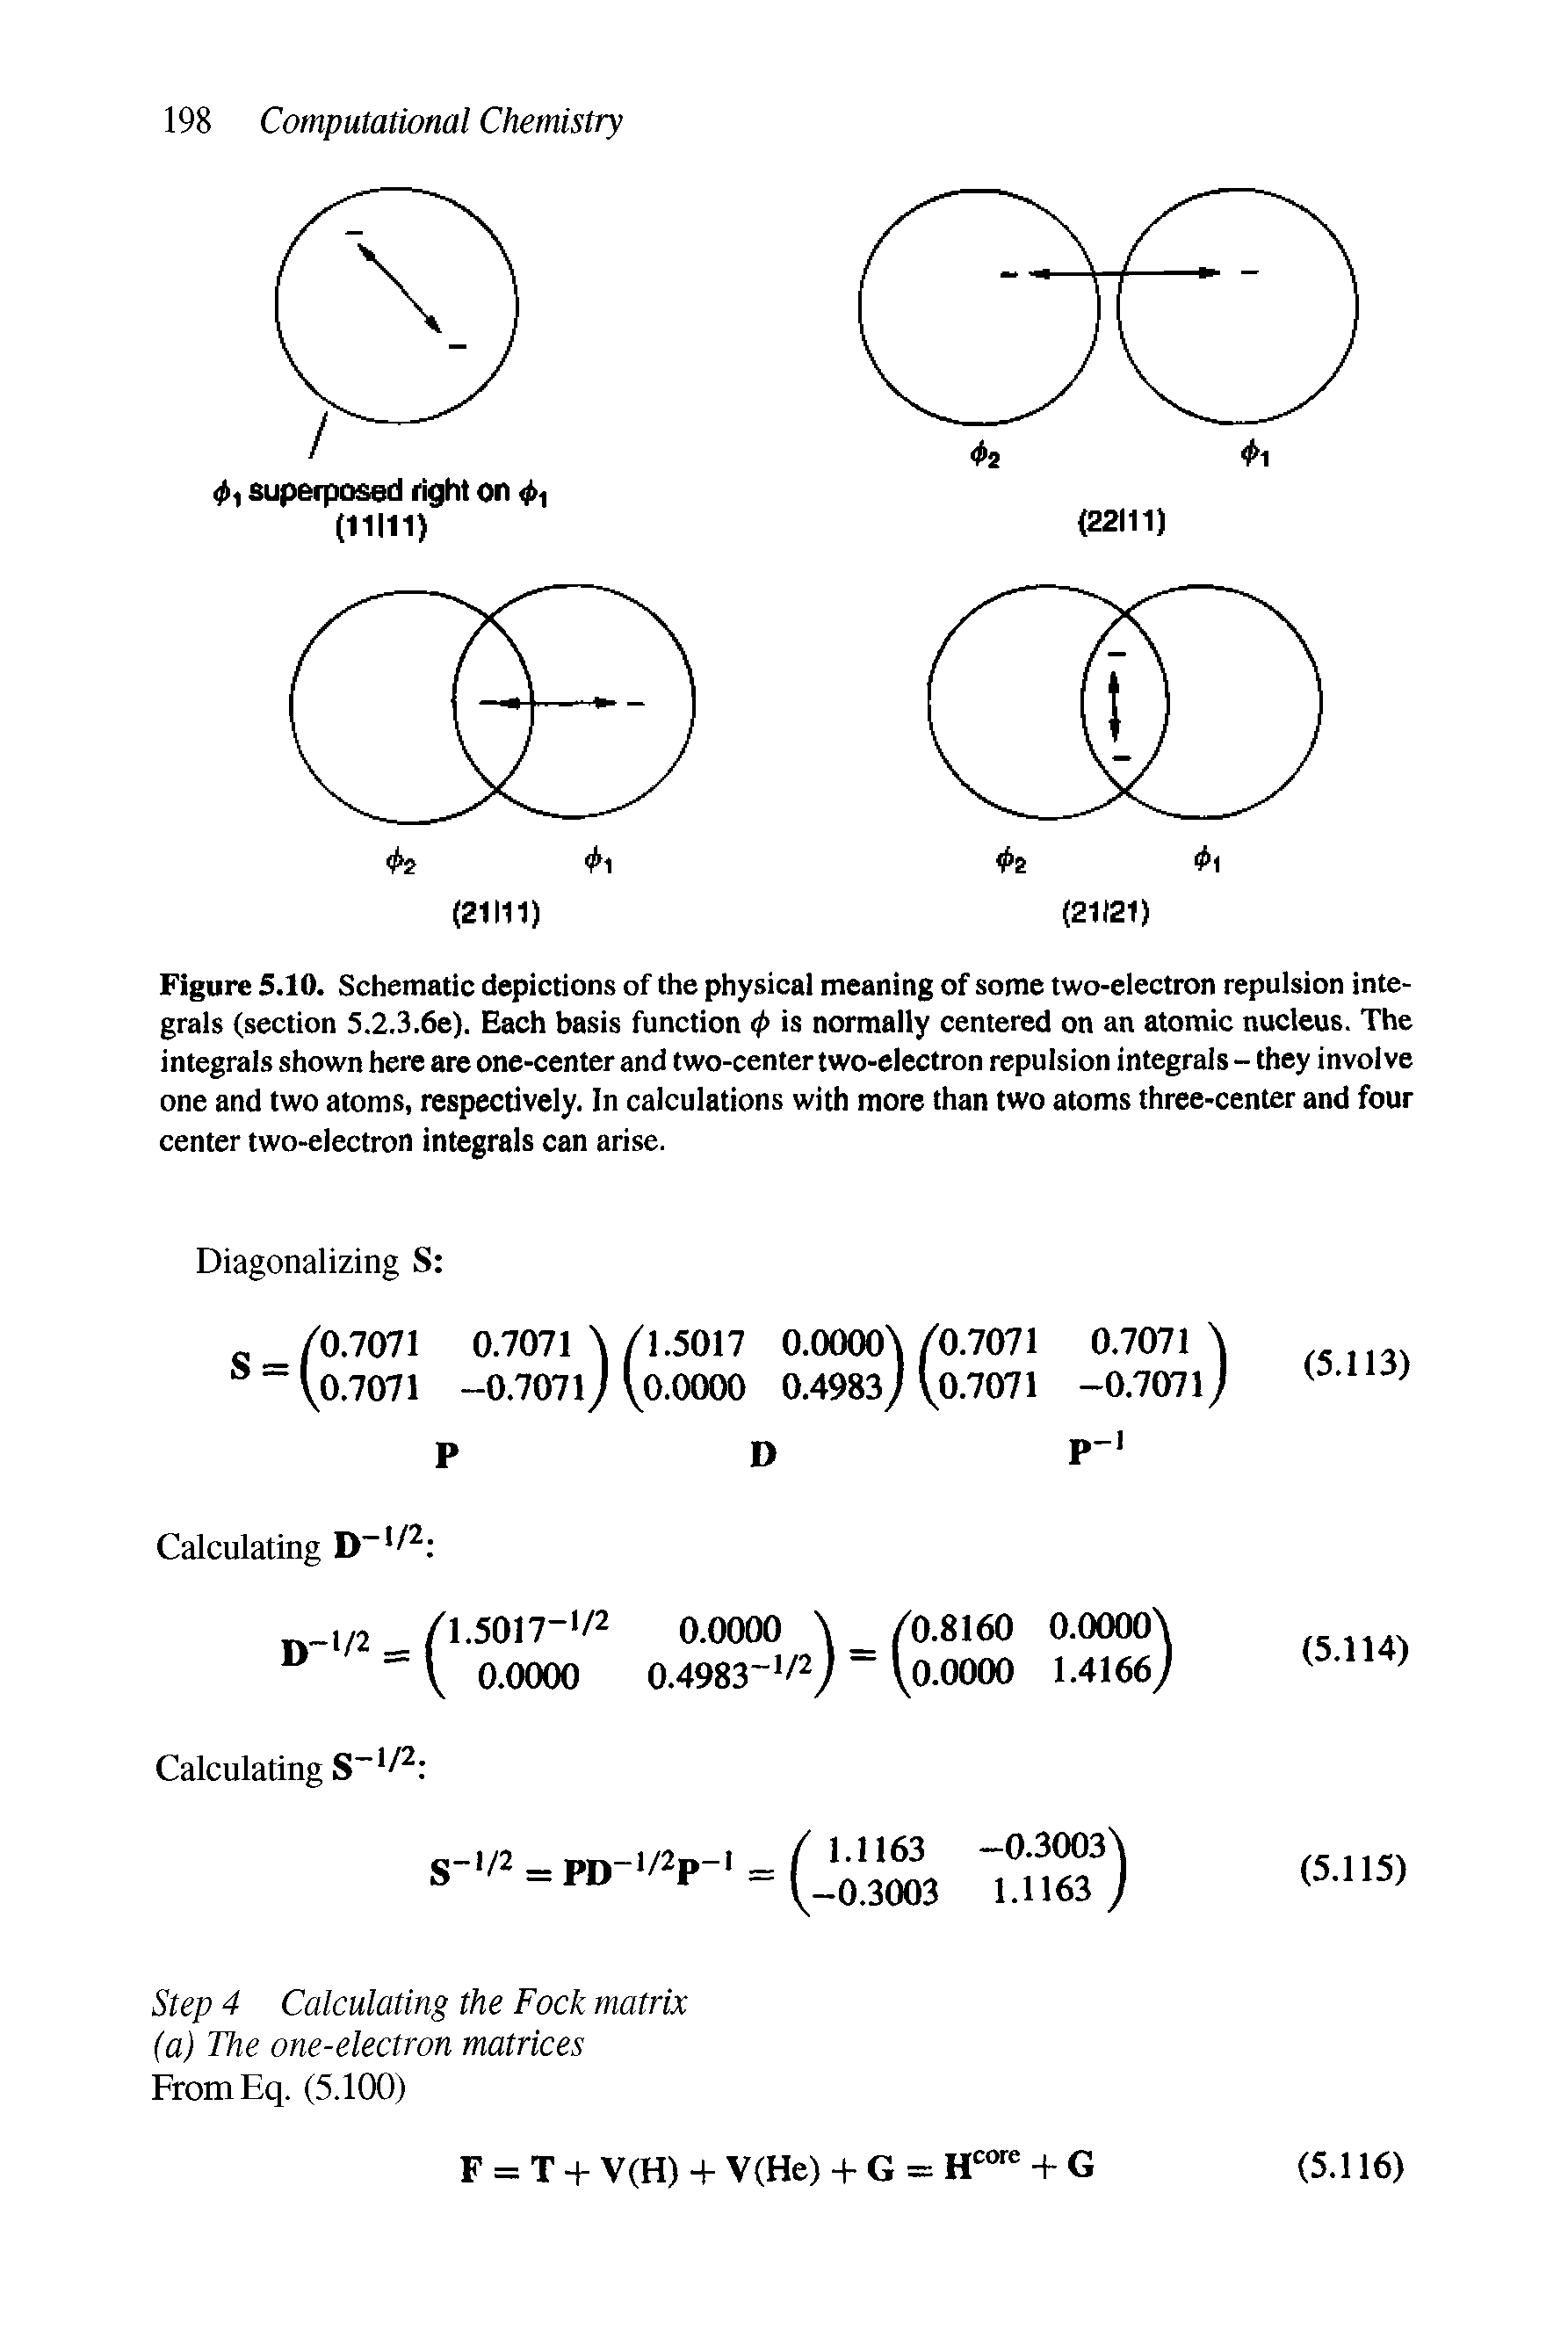 Figure 5.10. Schematic depictions of the physical meaning of some two-electron repulsion integrals (section 5.2.3.6e). Each basis function (j> is normally centered on an atomic nucleus. The integrals shown here are one-center and two-center two-electron repulsion integrals - they involve one and two atoms, respectively. In calculations with more than two atoms three-center and four center two-electron integrals can arise.